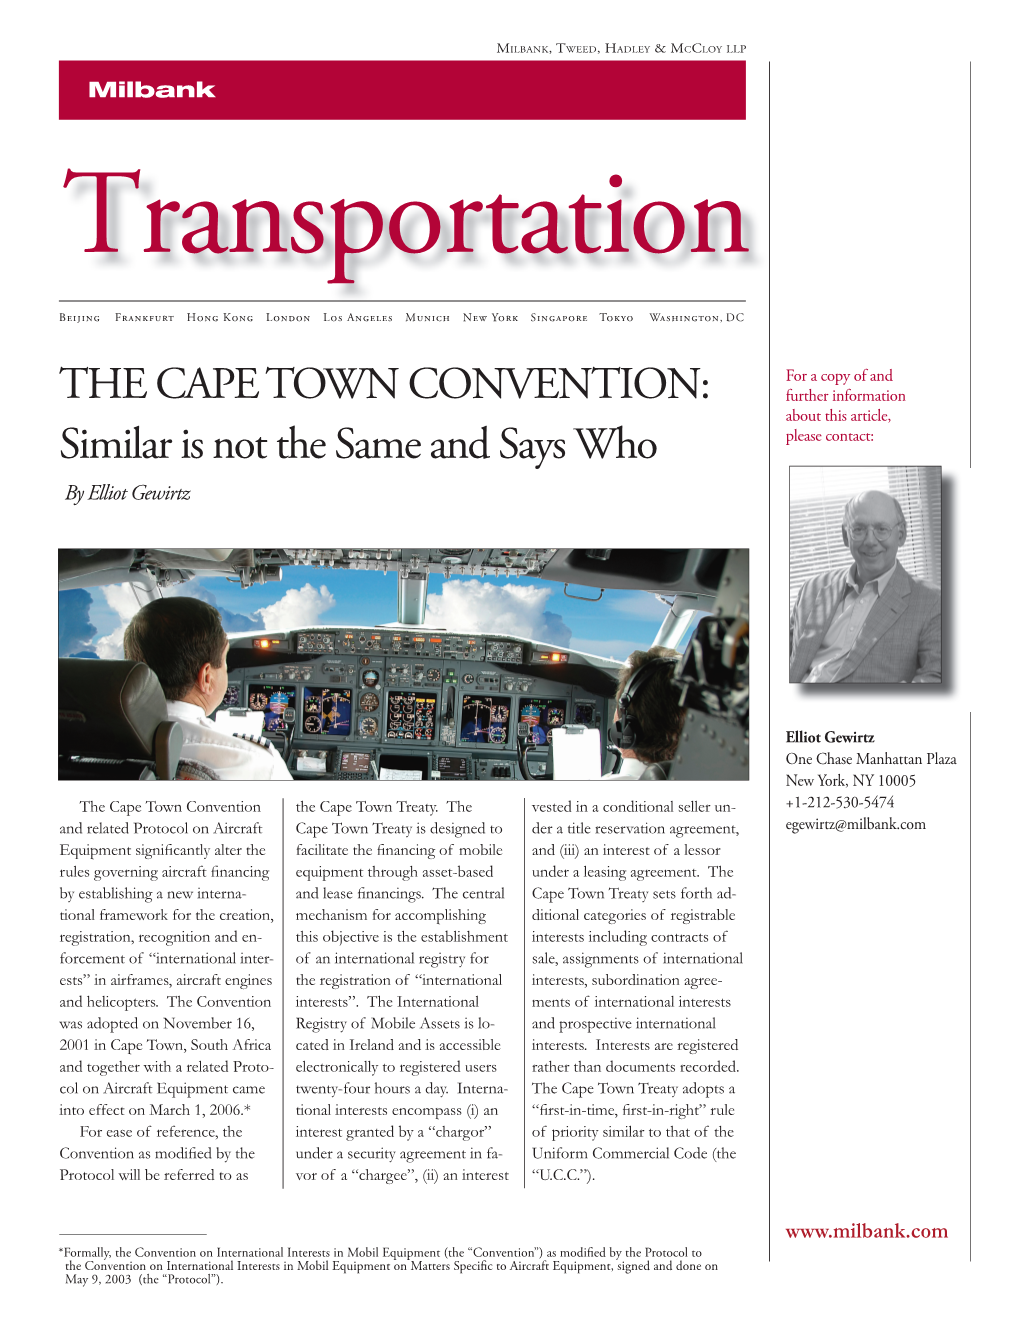 THE CAPE TOWN CONVENTION: Further Information About This Article, Similar Is Not the Same and Says Who Please Contact: by Elliot Gewirtz